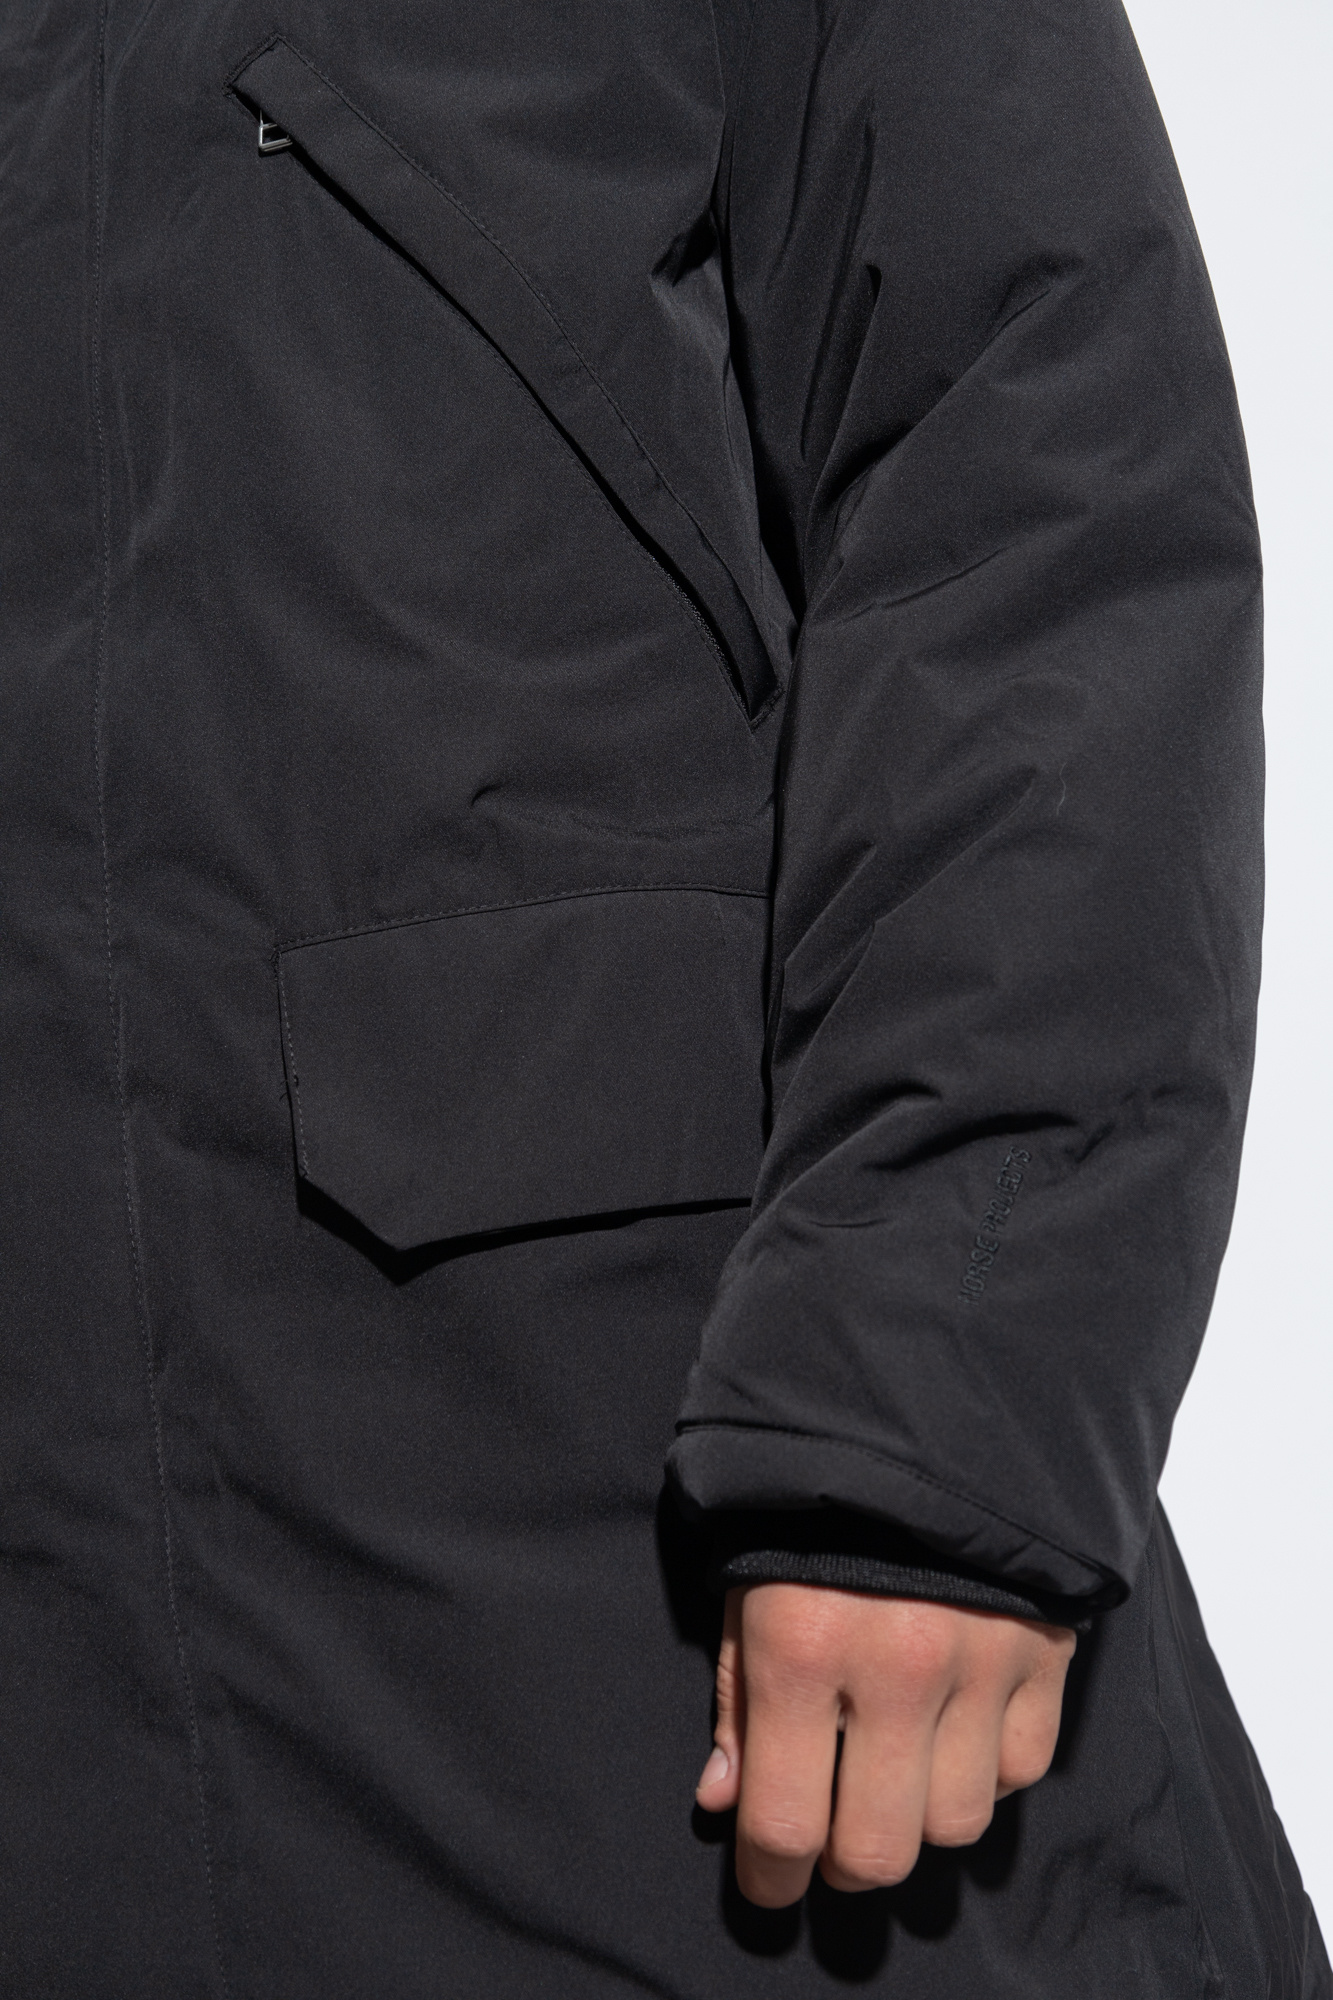 Norse Projects ‘Stavanger’ jacket